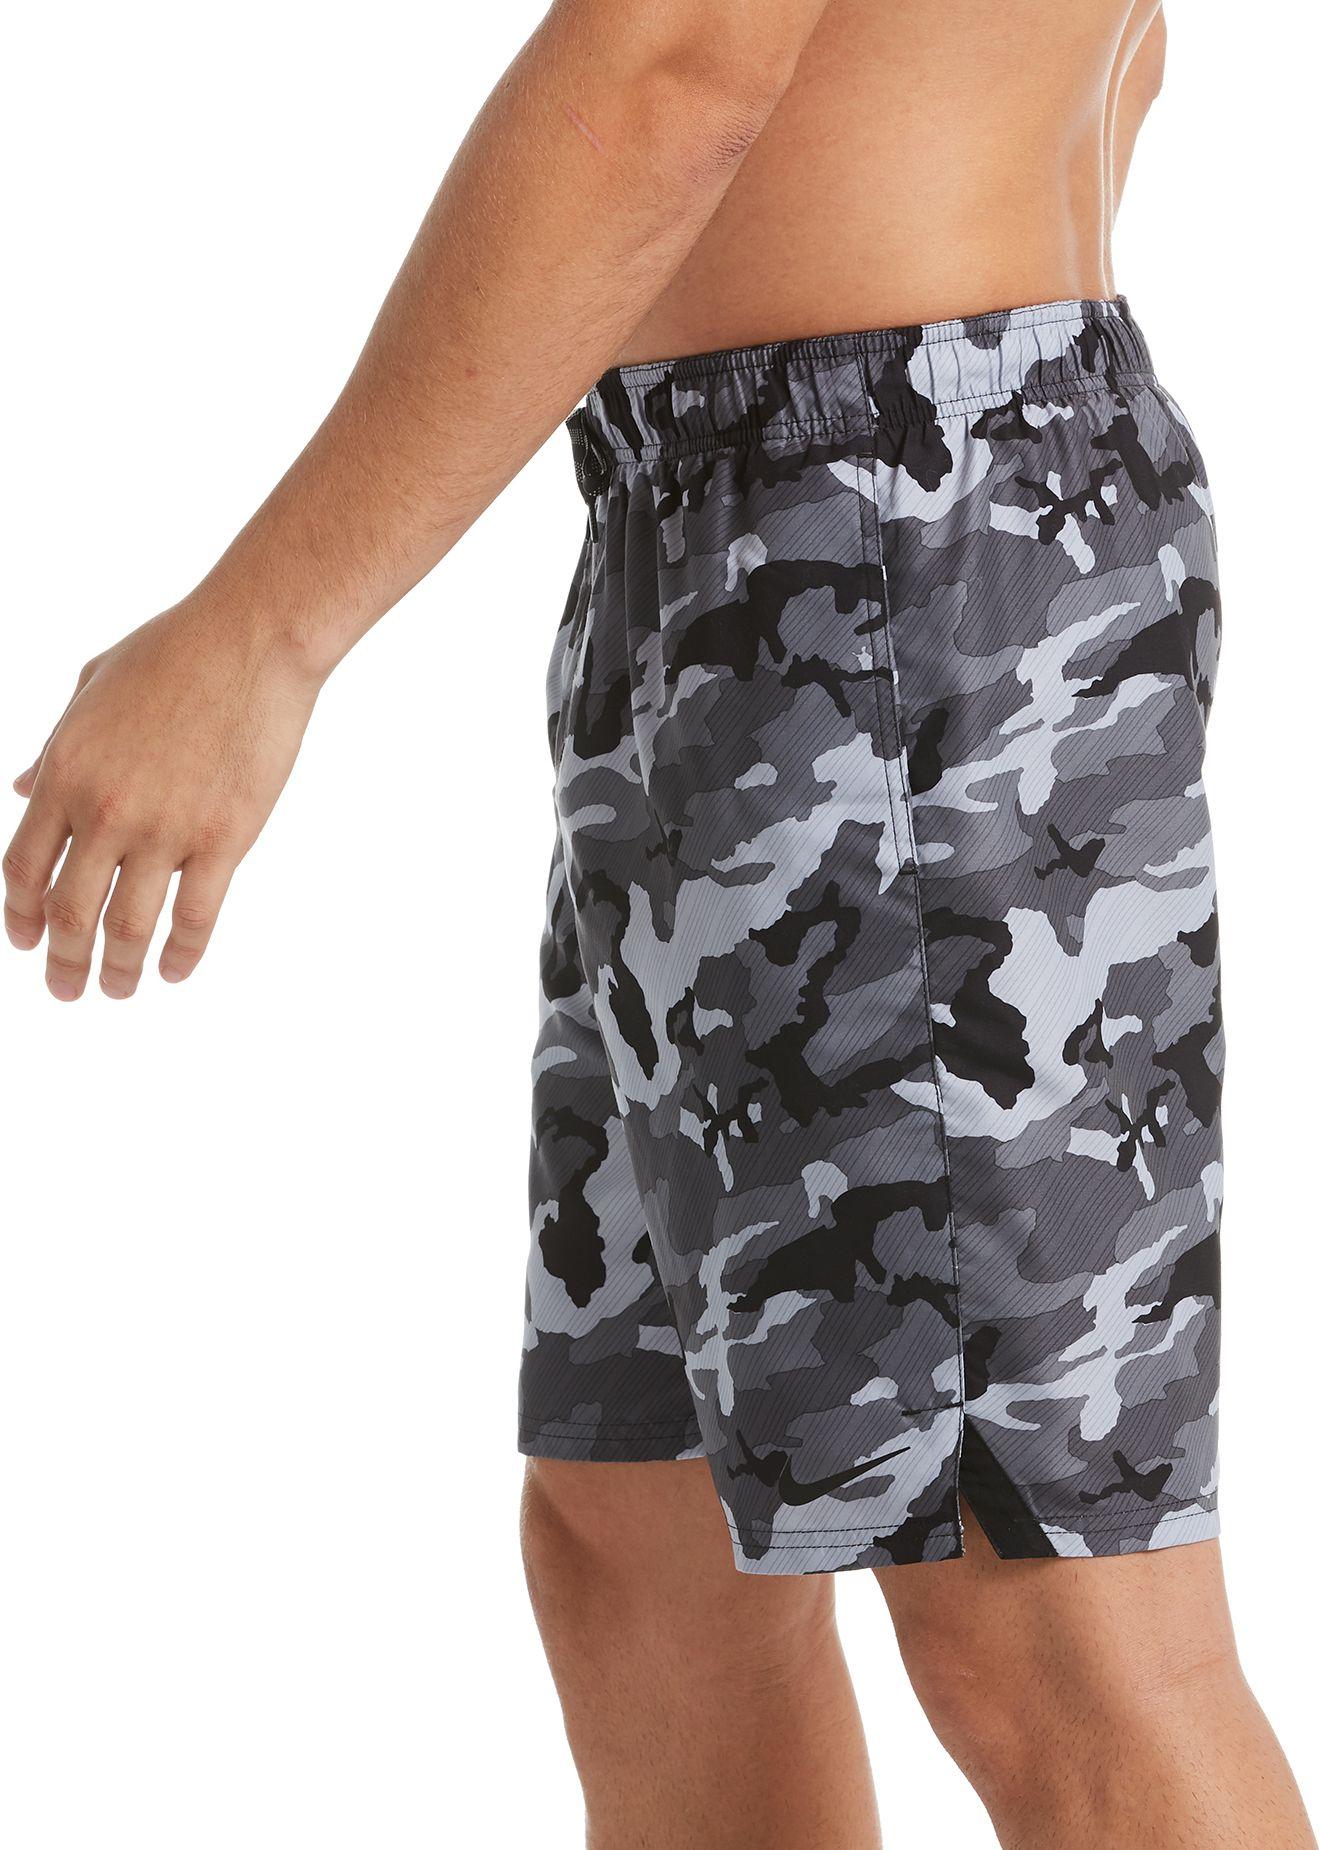 Nike Synthetic Camo Volley Swim Trunks in Black for Men - Lyst